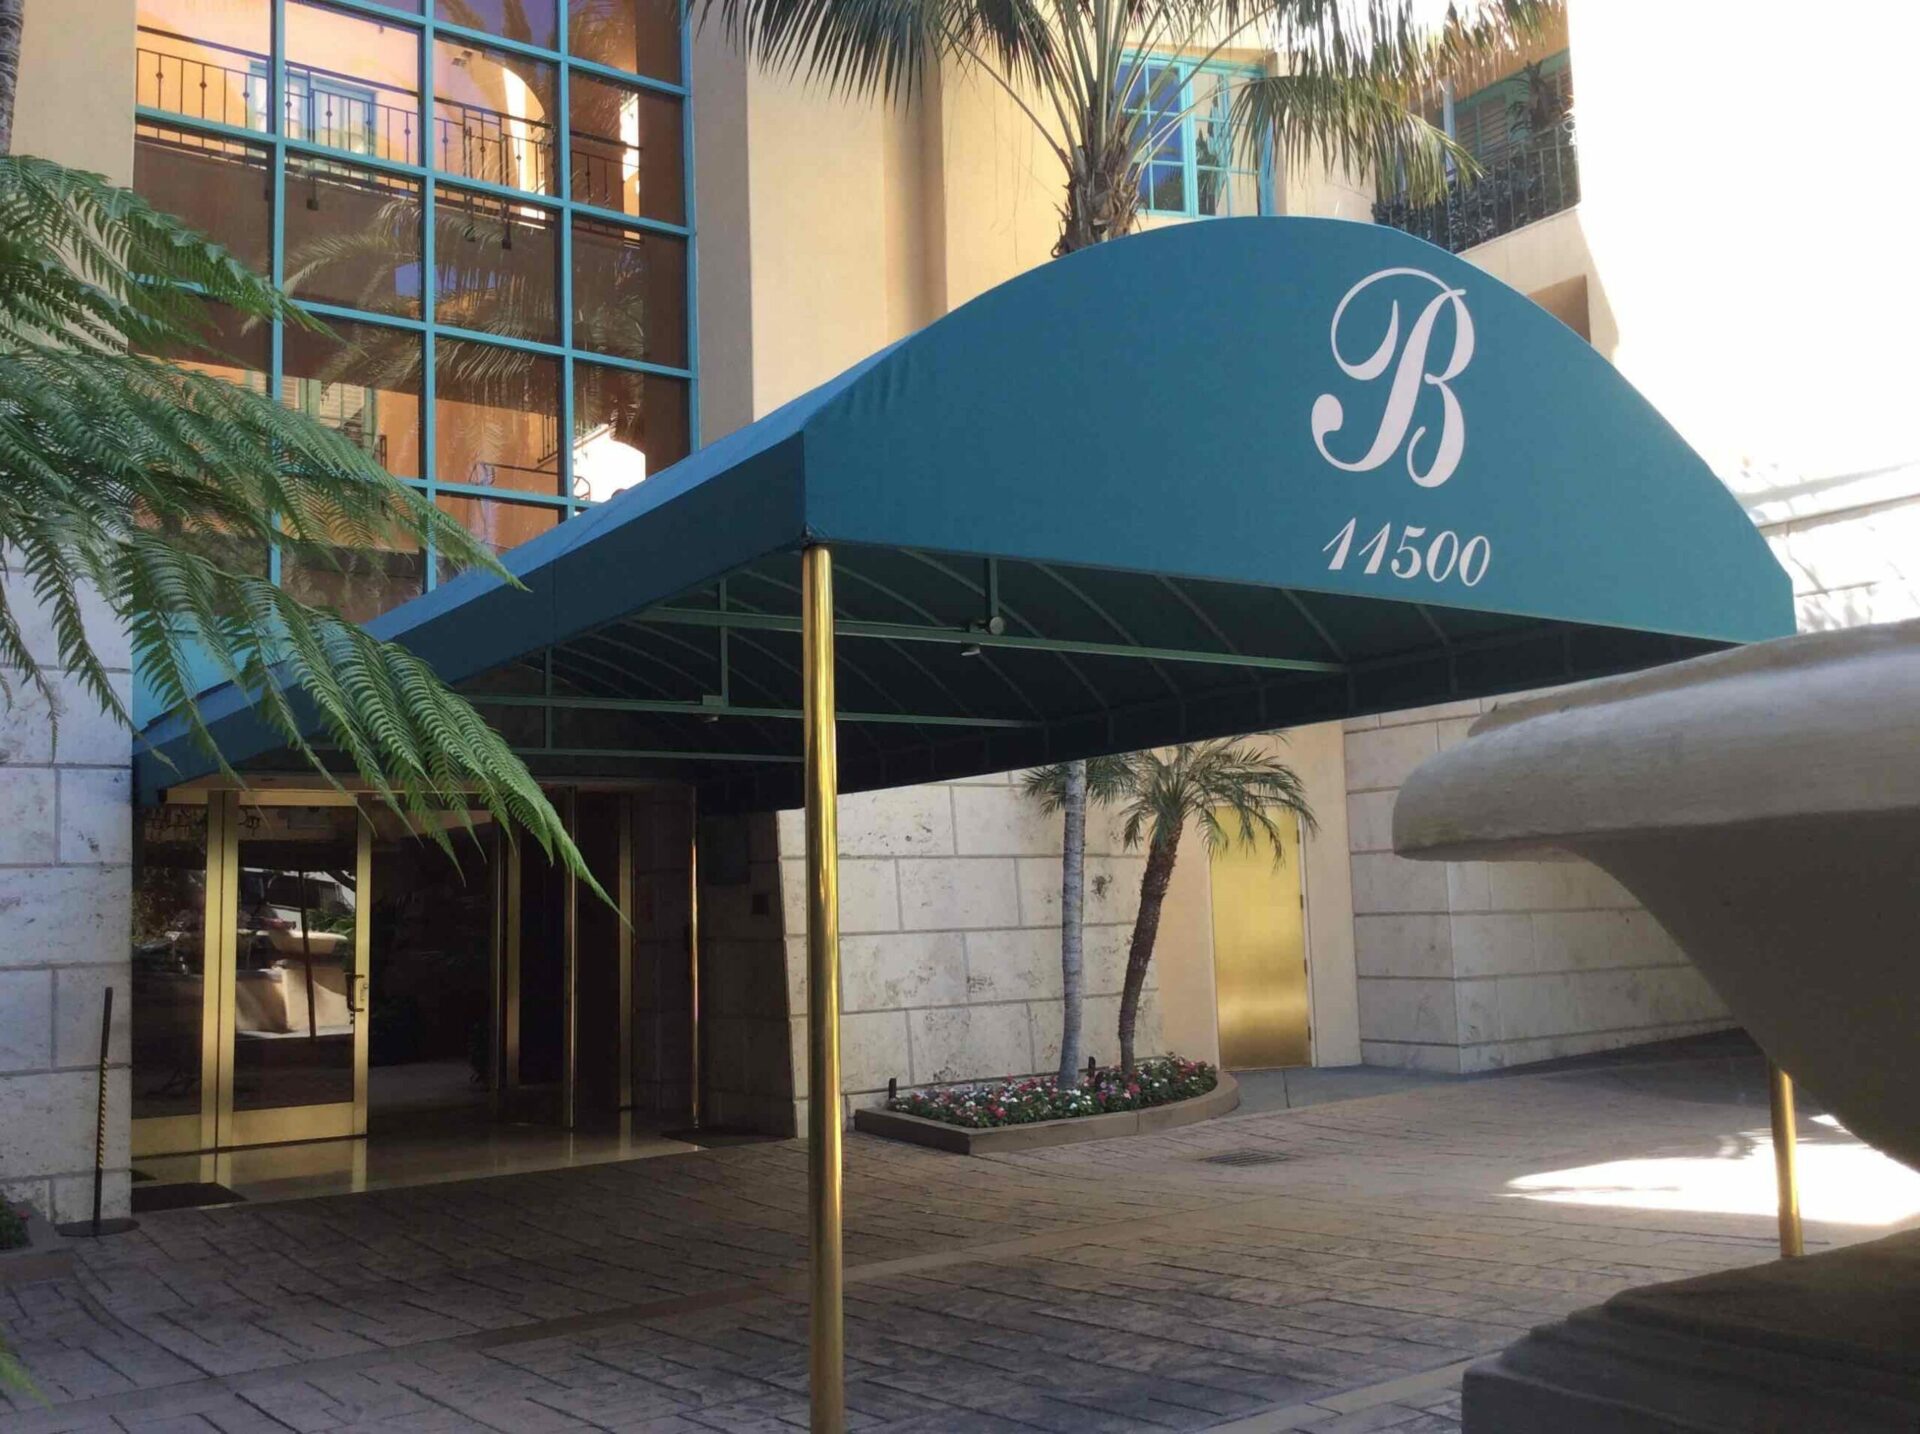 Entrance canopy to a hotel